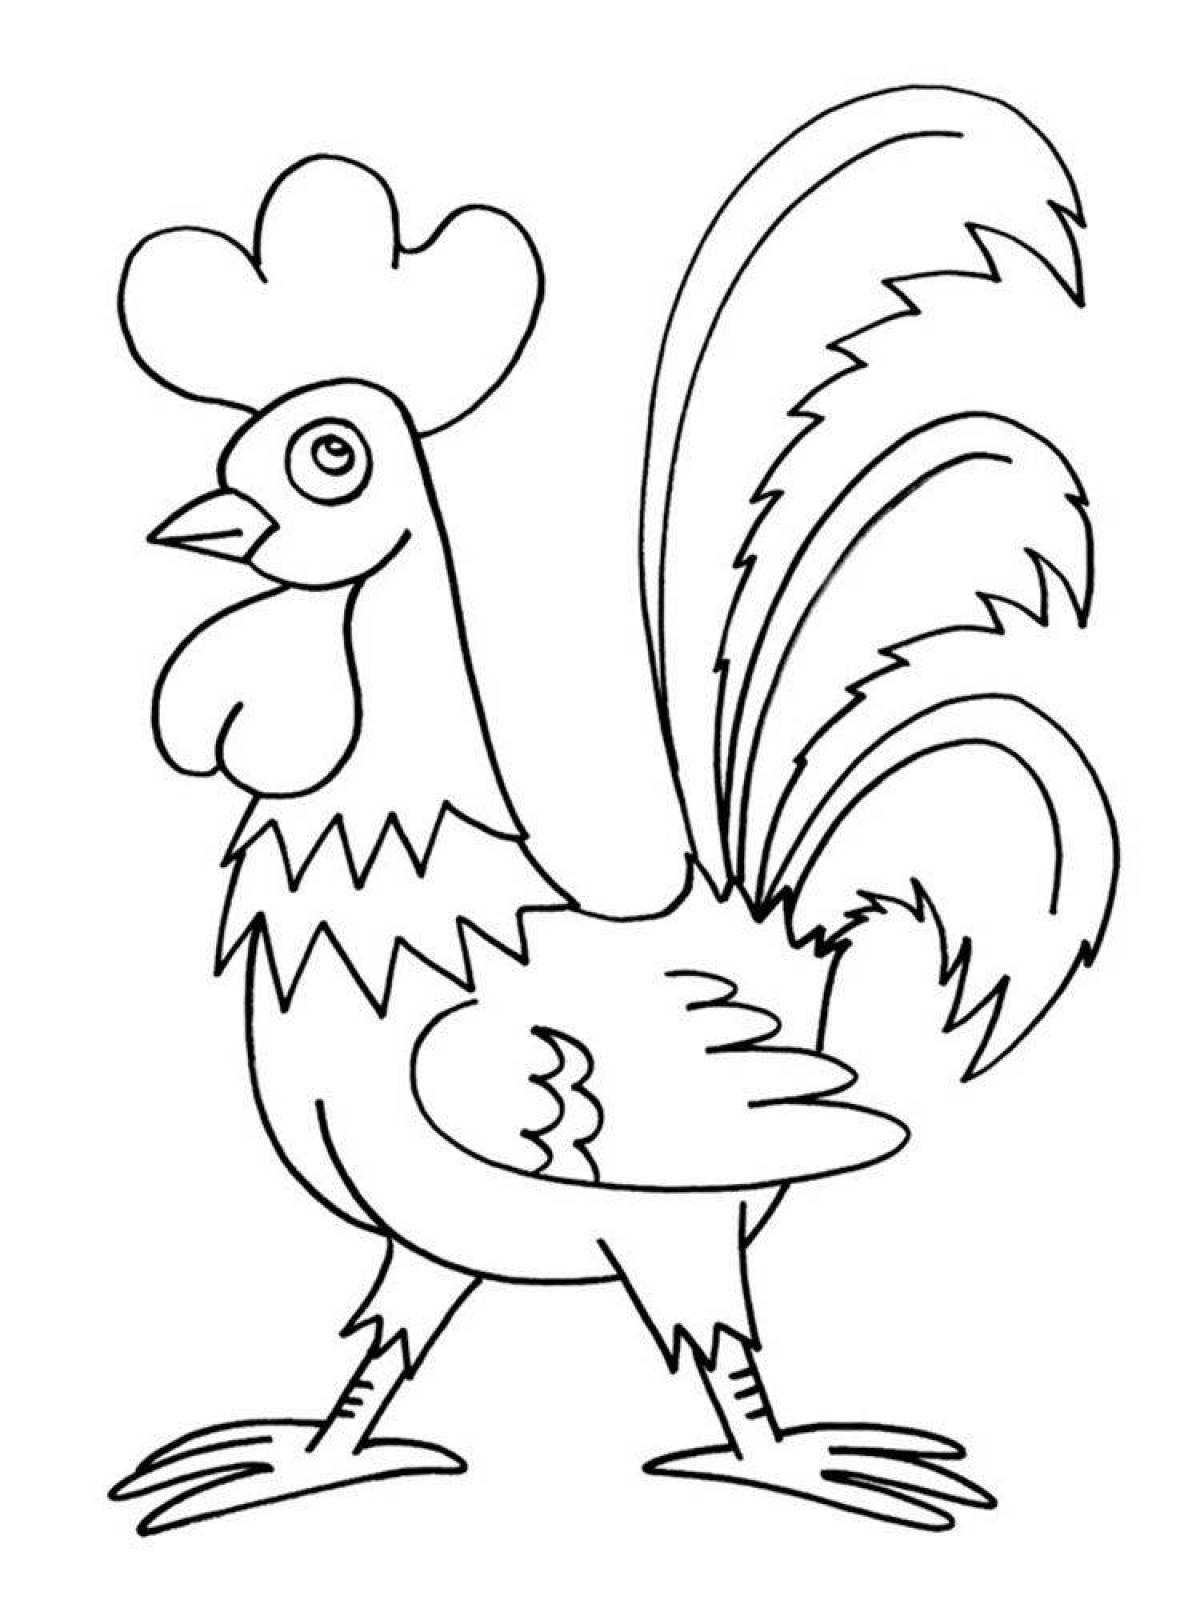 Coloring page witty rooster